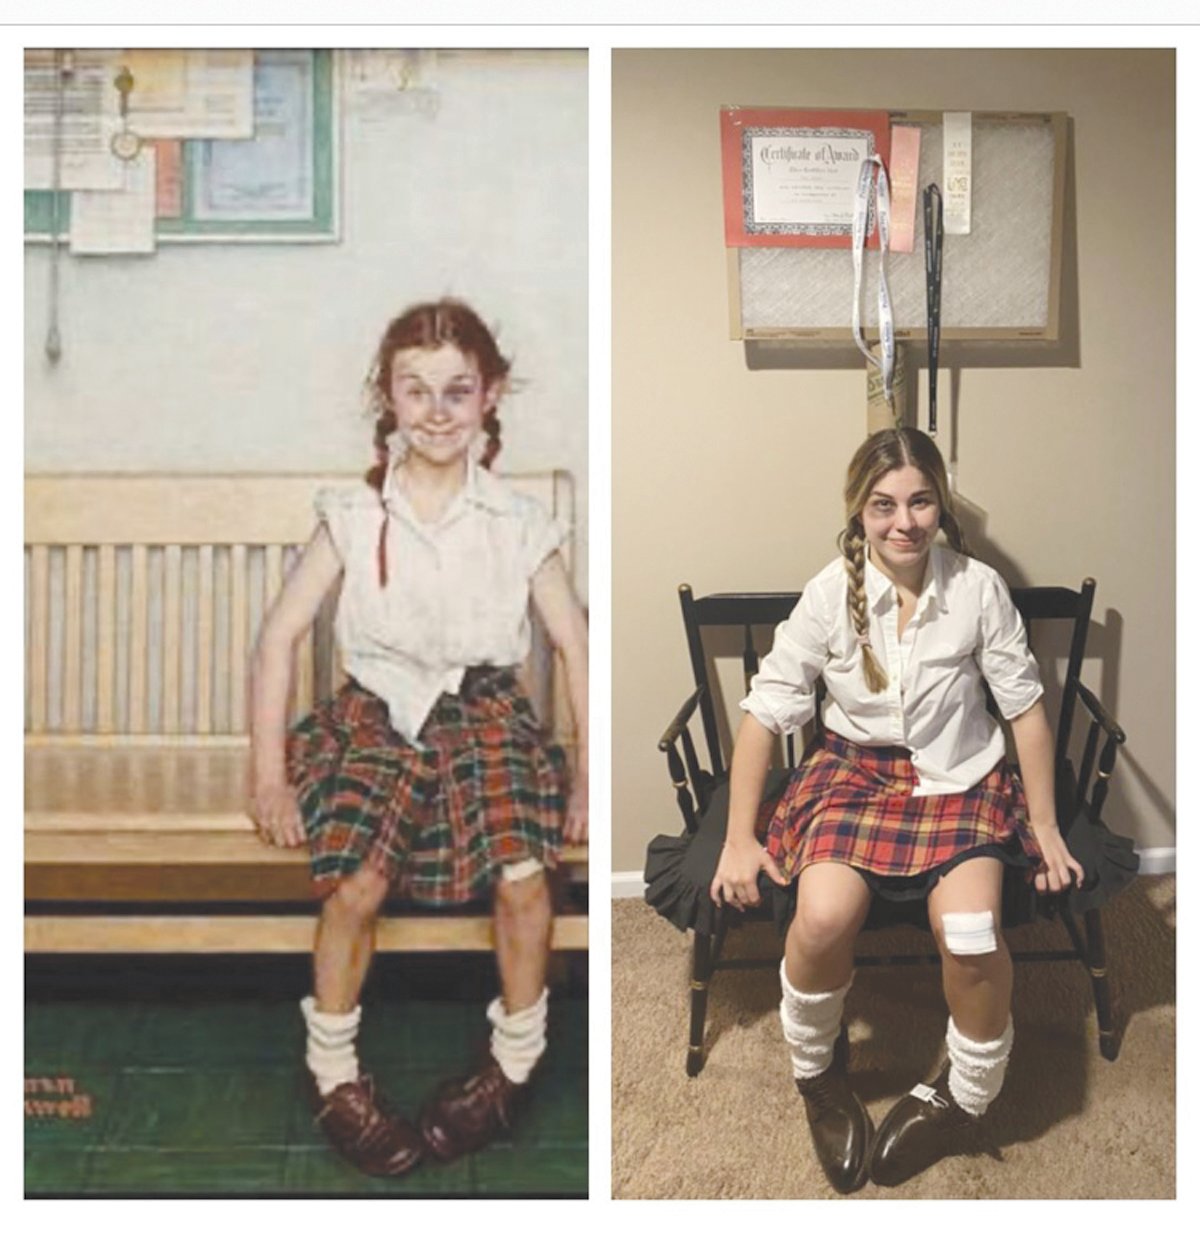 THE SHINER: Shannon Stauffer is cast as the schoolgirl sporting a black eye outside the principal's office in Norman Rockwell's "Shiner."